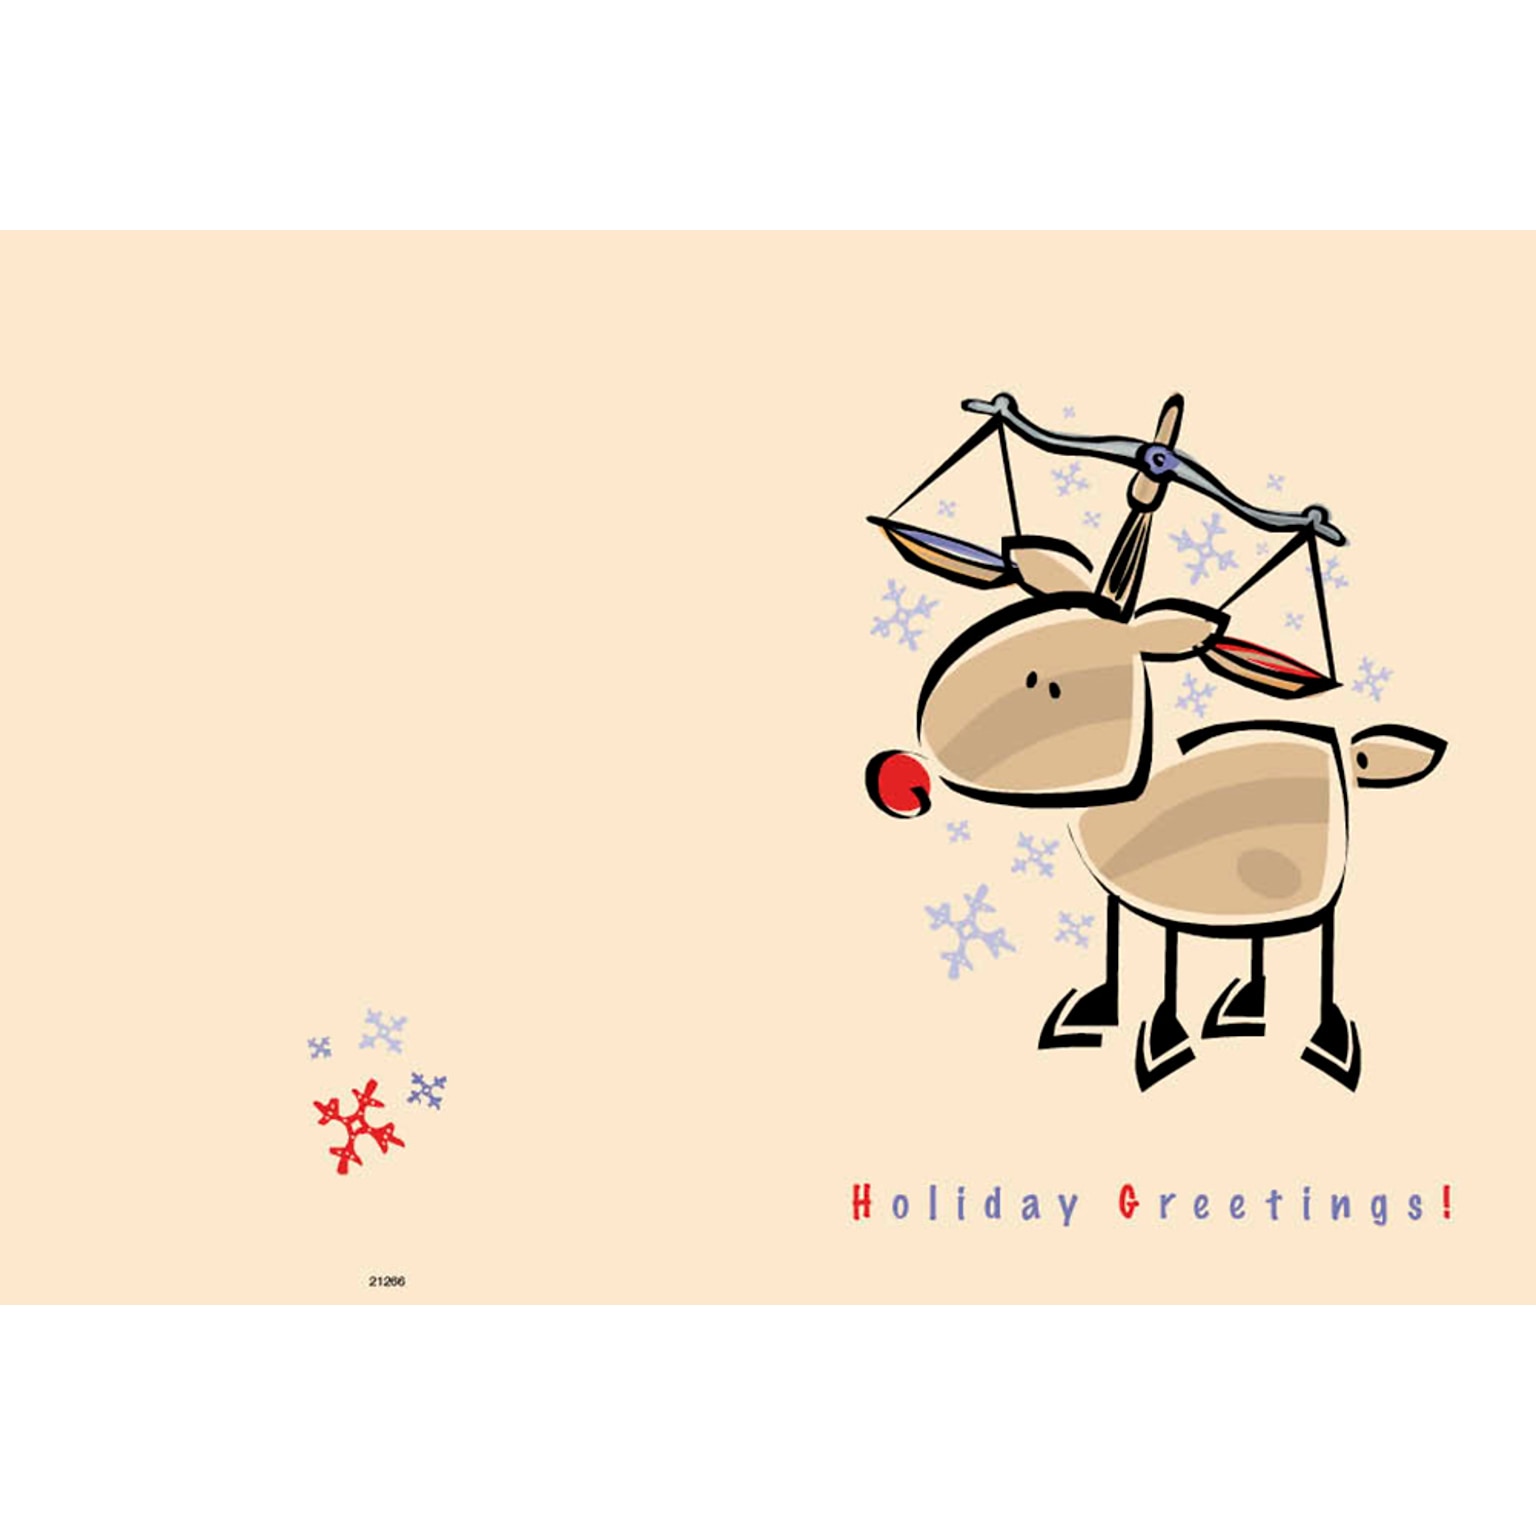 Happy Greetings - cartoon reindeer with scale on antlers - 7 x 10 scored for folding to 7 x 5, 25 cards w/A7 envelopes per set